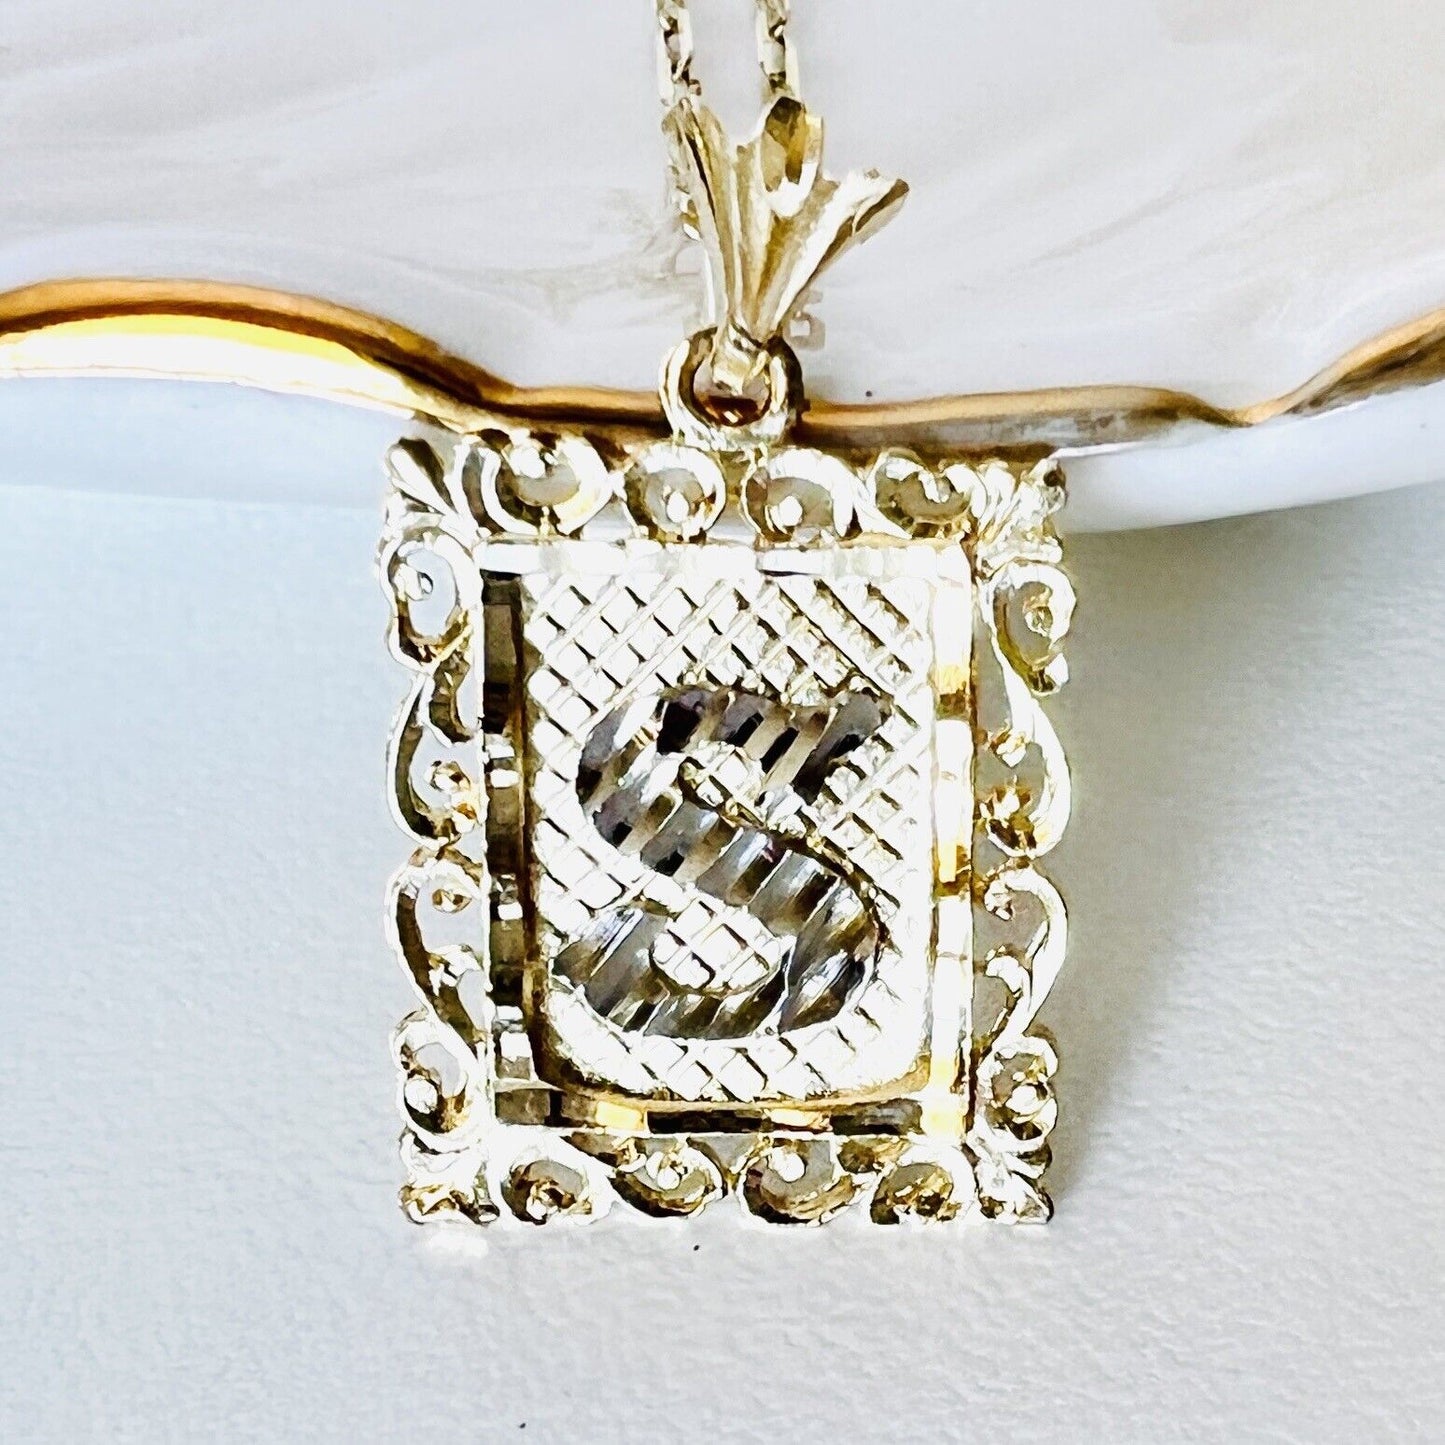 Solid 14k Yellow/White Gold "S" Initial Monogram Charm/Pendant, New 1.06"